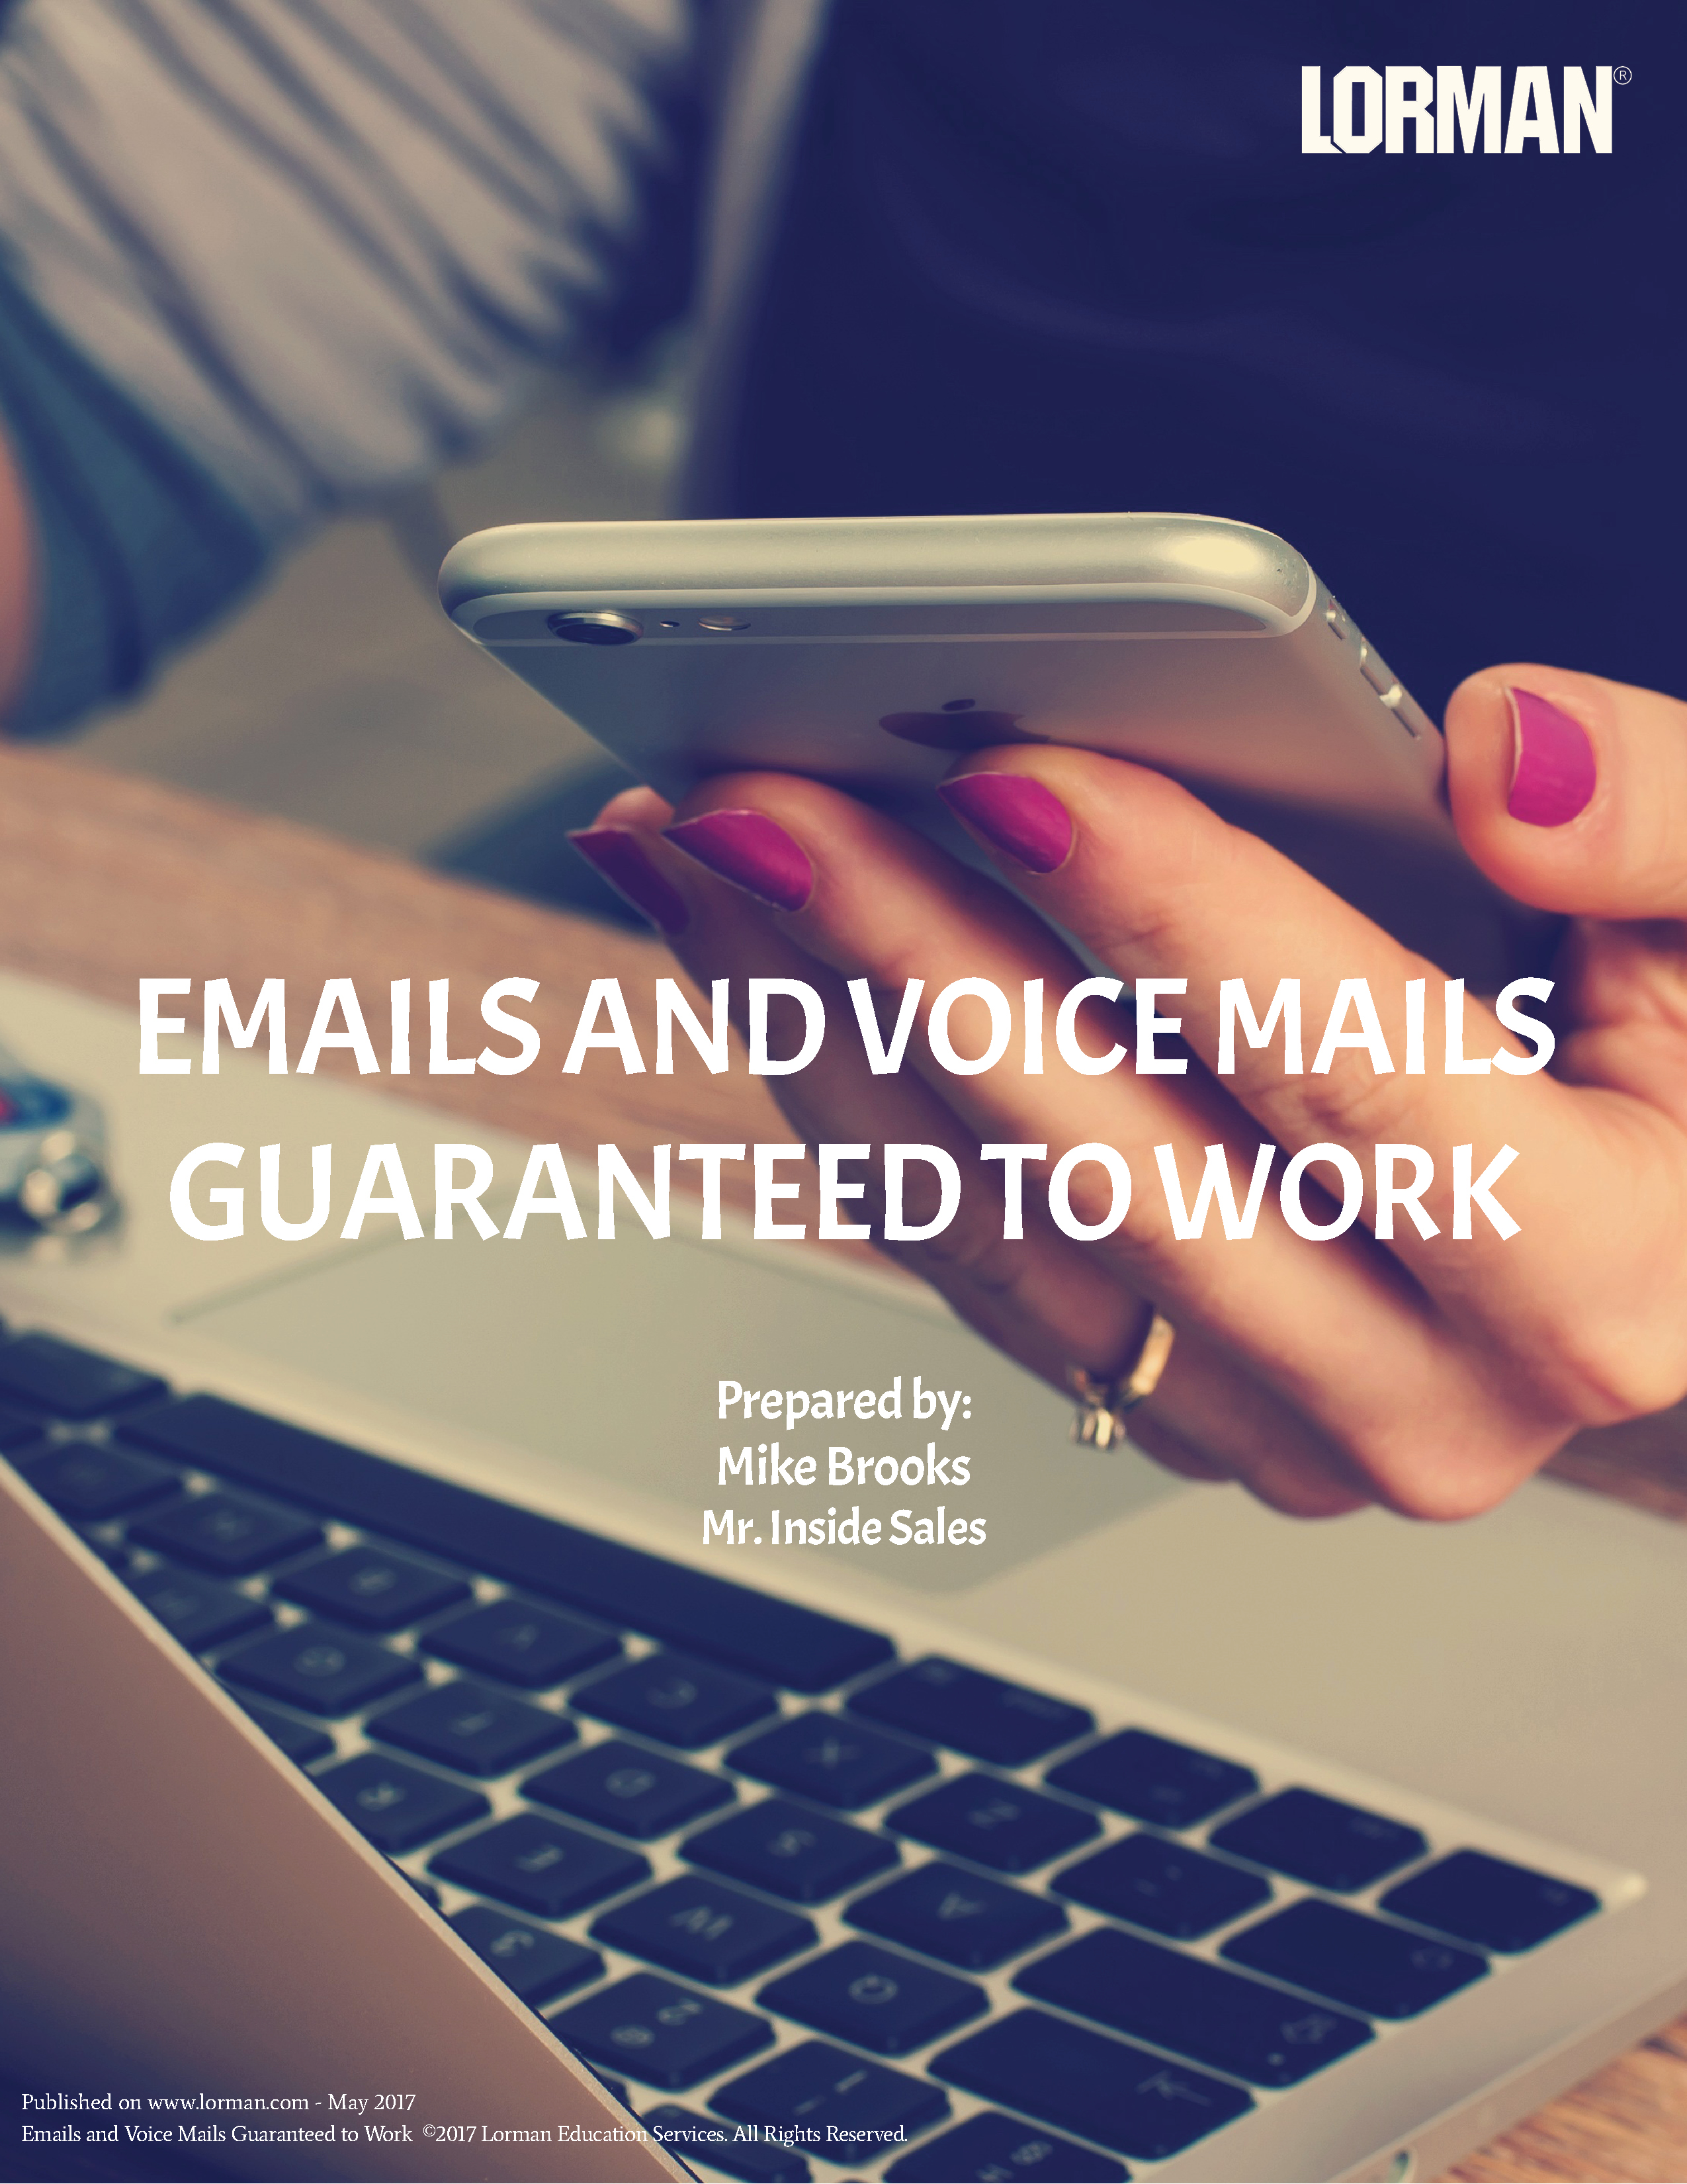 Emails and Voice Mails Guaranteed to Work